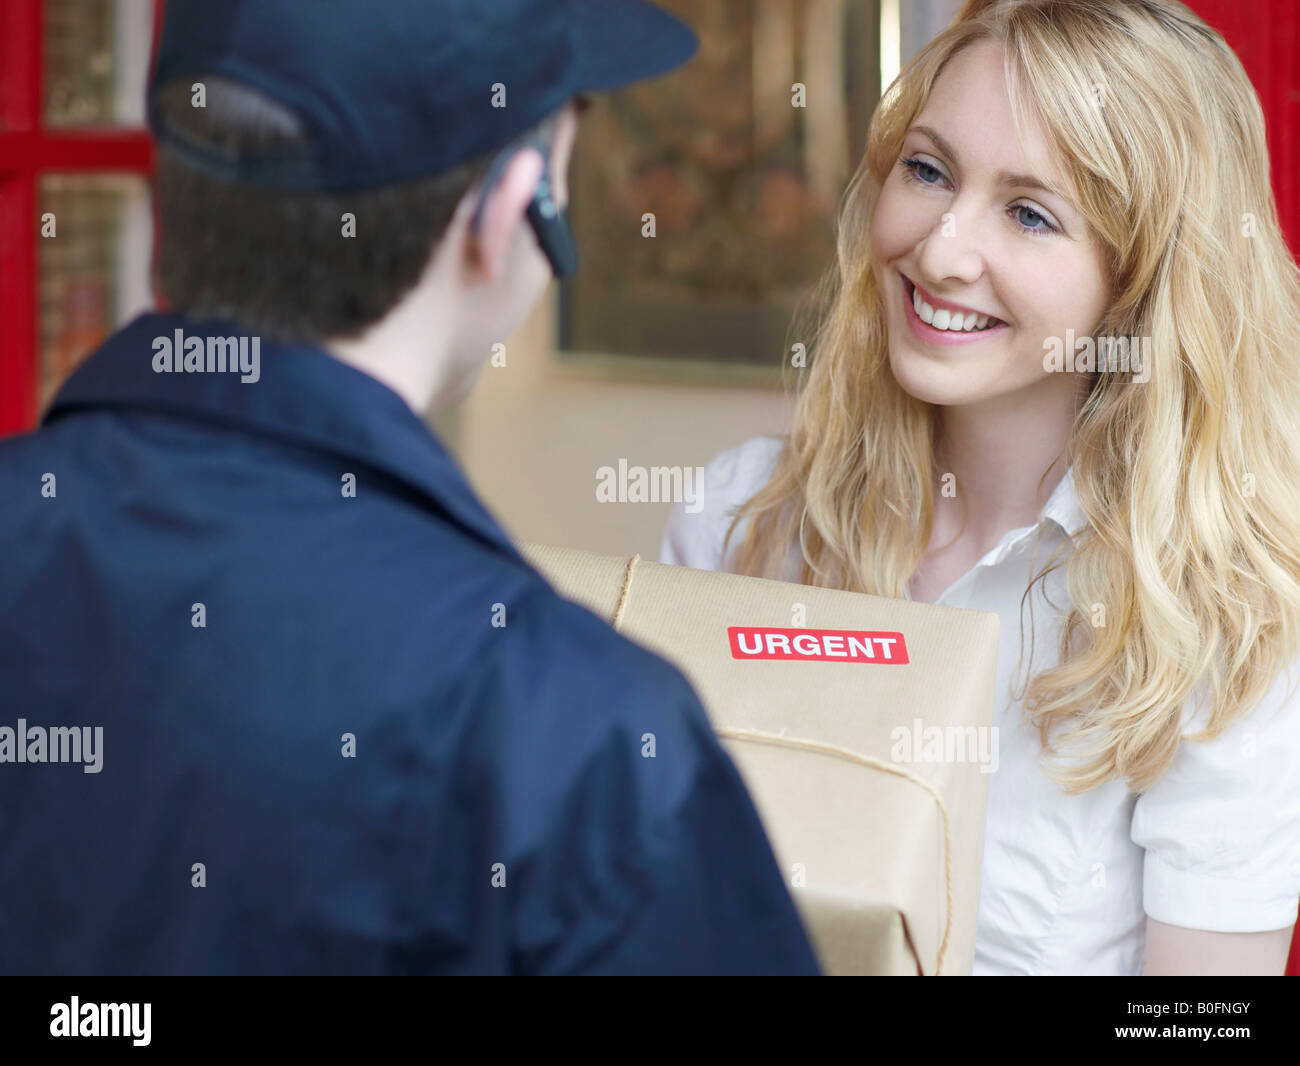 Woman receiving urgent delivery Stock Photo